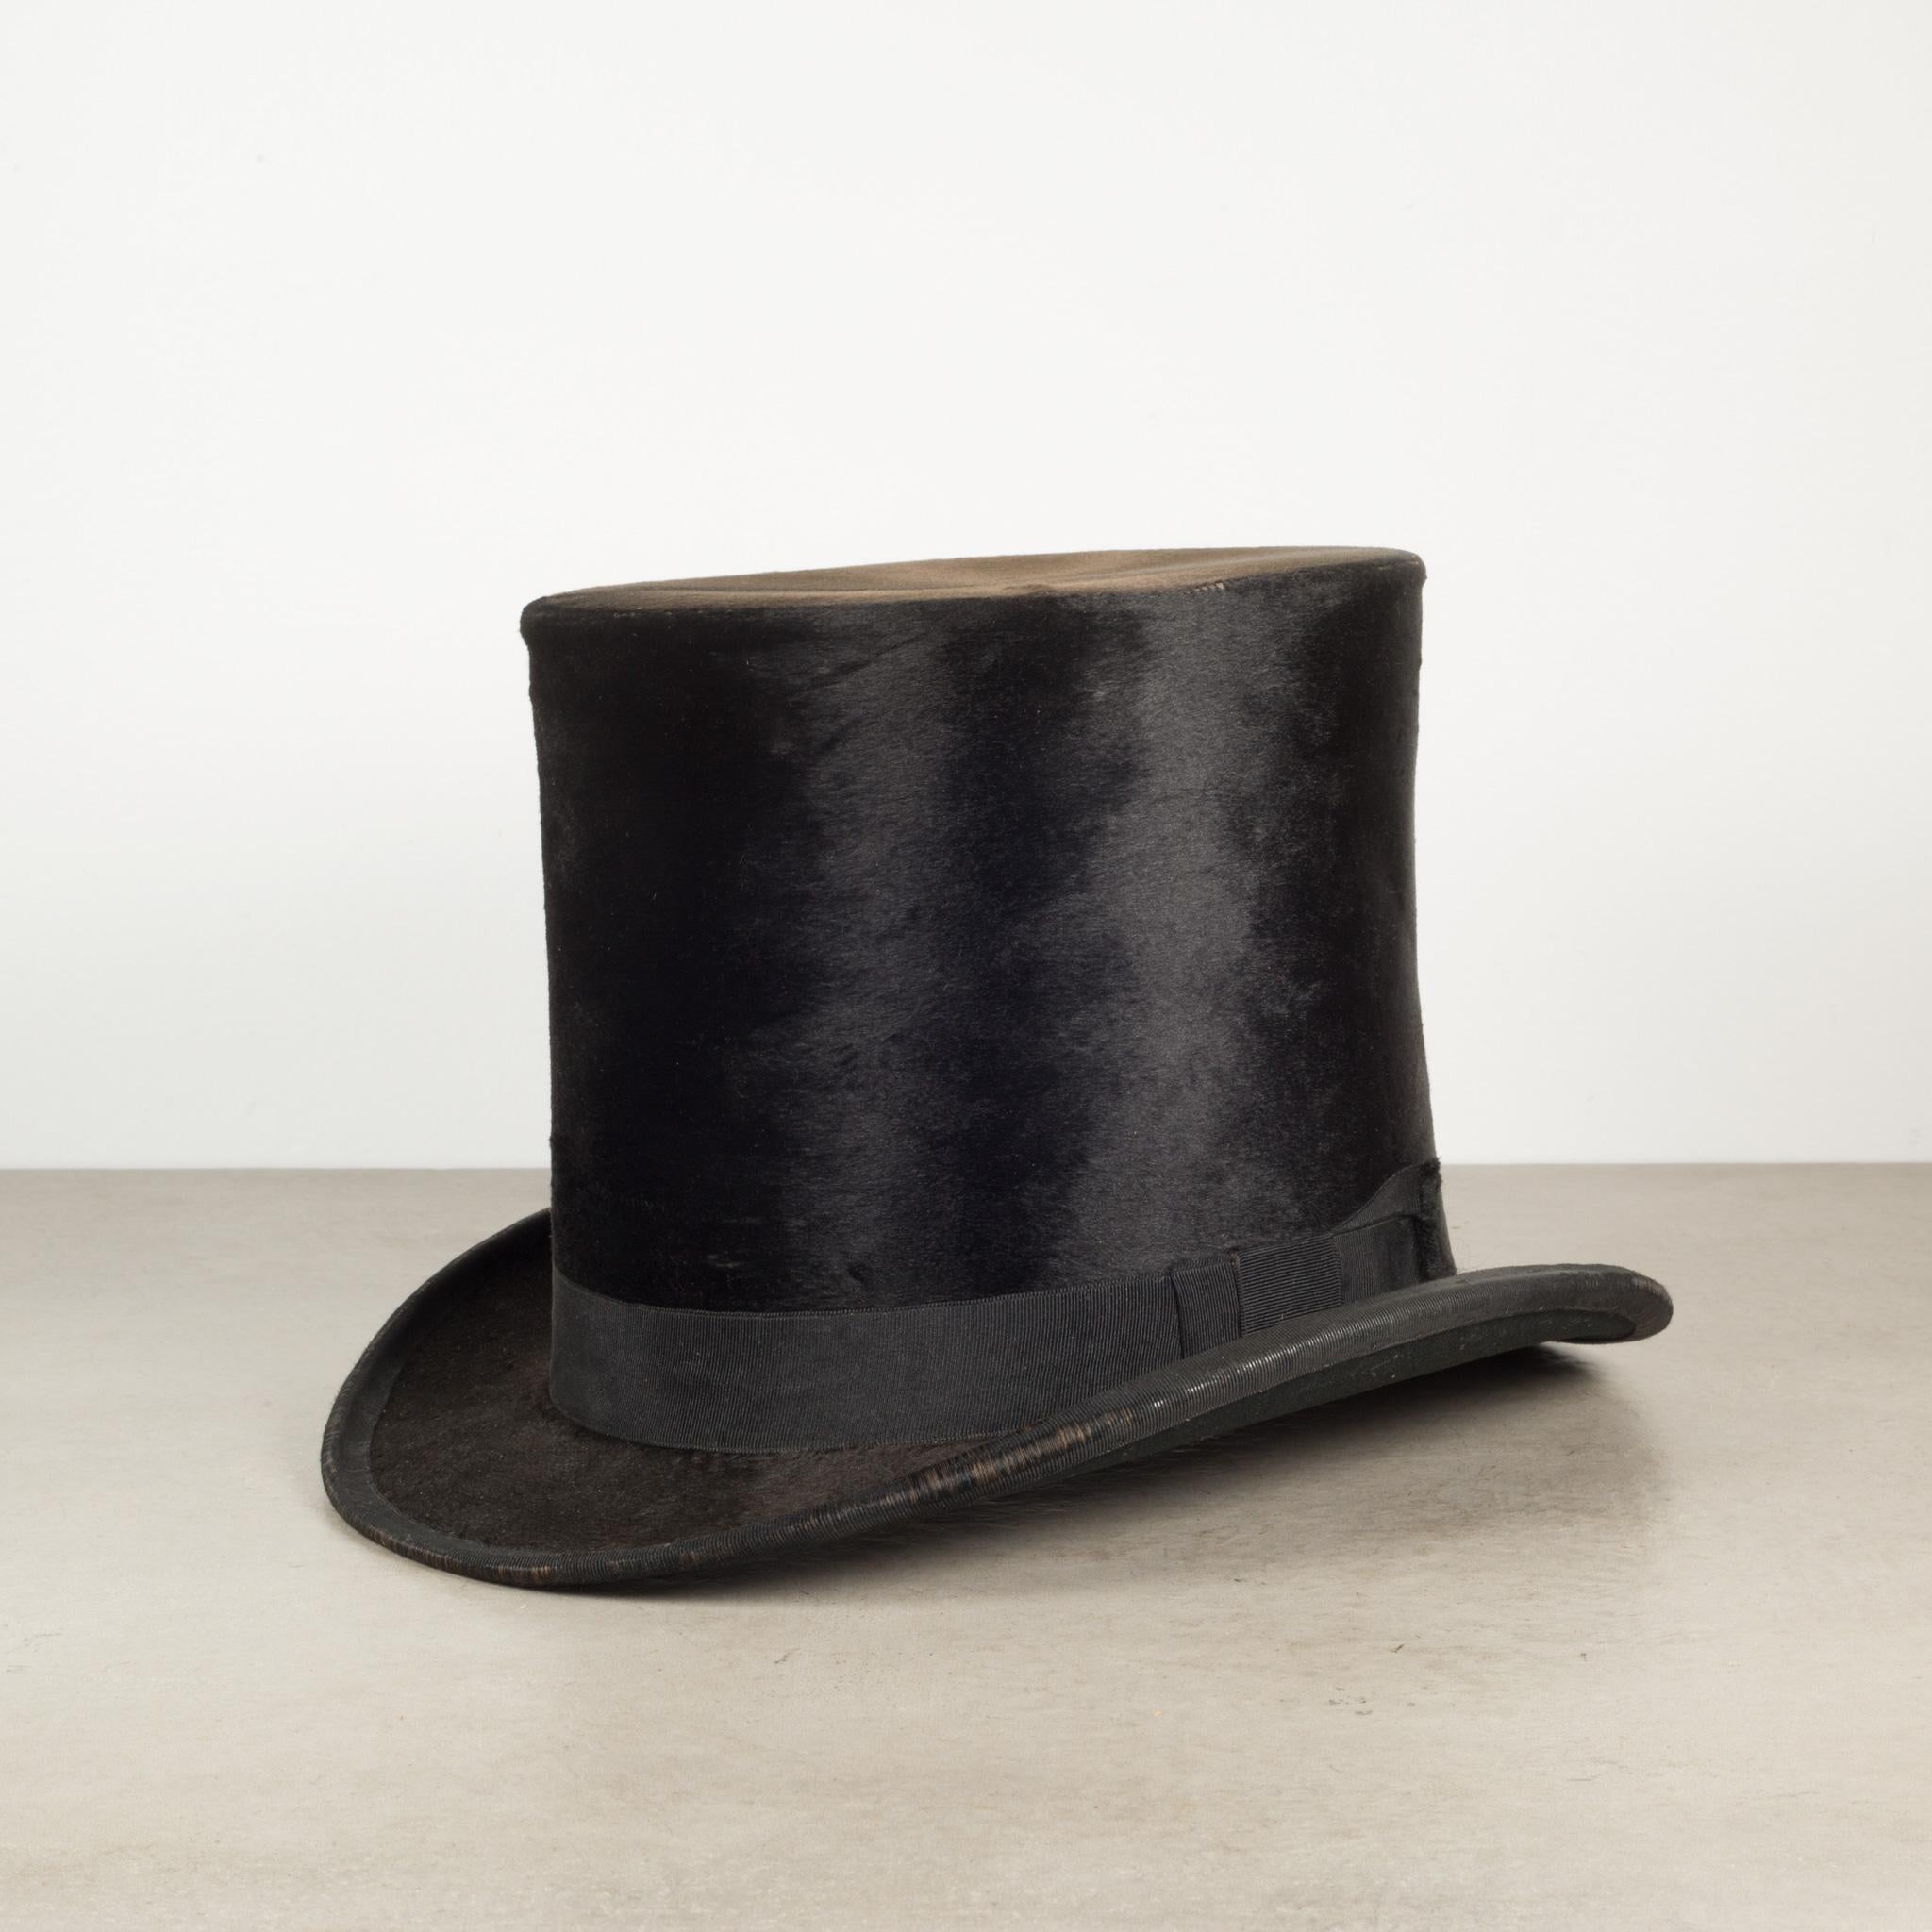 About

This is an original America Fine Make Co. beaver skin top hat with its original leather box. The top hat is covered in beaver skin which is in good condition, showing some slight wear. The leather hat box has a silver latch and some slight